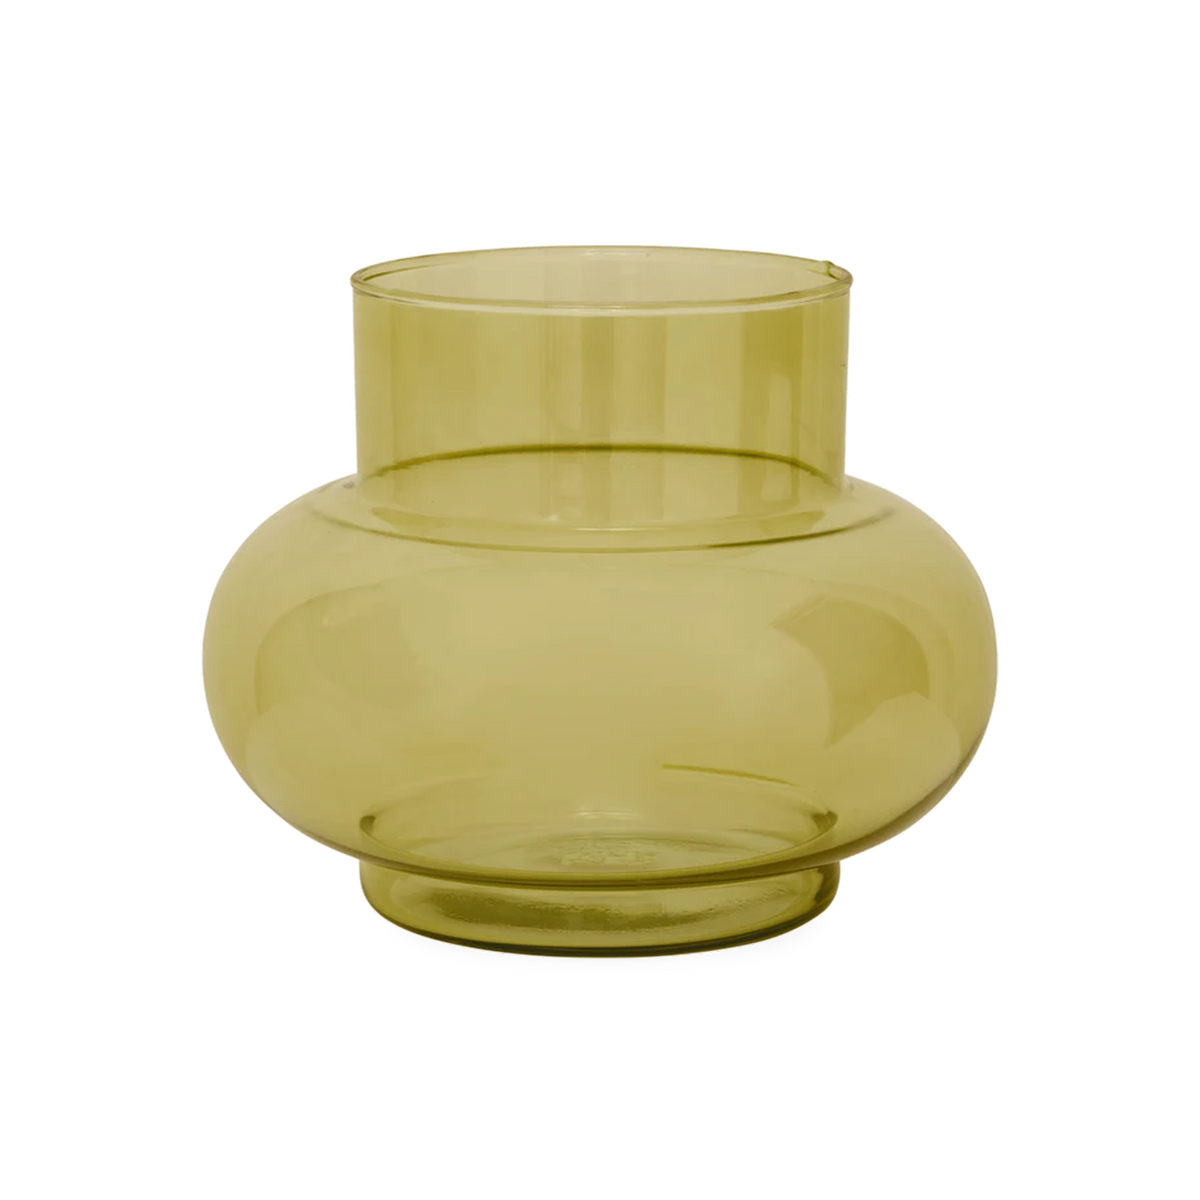 Combining modern design with sustainable values, the Belly Short Glass Vase features a perfectly symmetric wide body and is made from recycled glass.